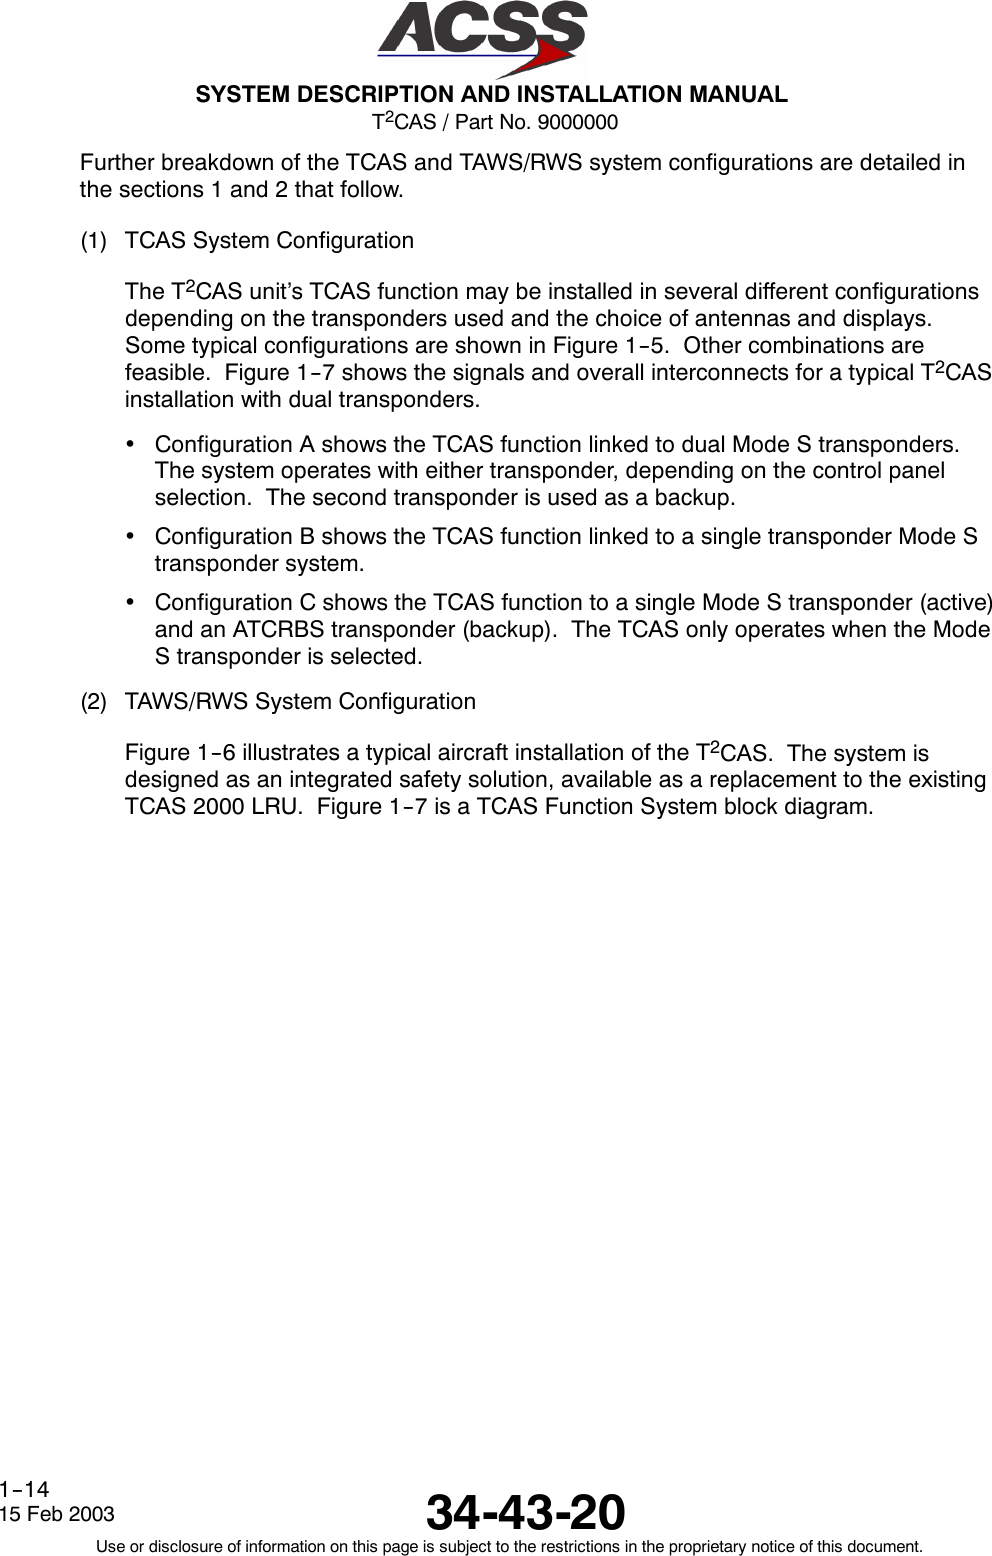 T2CAS / Part No. 9000000SYSTEM DESCRIPTION AND INSTALLATION MANUAL34-43-2015 Feb 2003Use or disclosure of information on this page is subject to the restrictions in the proprietary notice of this document.1--14Further breakdown of the TCAS and TAWS/RWS system configurations are detailed inthe sections 1 and 2 that follow.(1) TCAS System ConfigurationThe T2CAS unit’s TCAS function may be installed in several different configurationsdepending on the transponders used and the choice of antennas and displays.Some typical configurations are shown in Figure 1--5. Other combinations arefeasible. Figure 1--7 shows the signals and overall interconnects for a typical T2CASinstallation with dual transponders.•Configuration A shows the TCAS function linked to dual Mode S transponders.The system operates with either transponder, depending on the control panelselection. The second transponder is used as a backup.•Configuration B shows the TCAS function linked to a single transponder Mode Stransponder system.•Configuration C shows the TCAS function to a single Mode S transponder (active)and an ATCRBS transponder (backup). The TCAS only operates when the ModeS transponder is selected.(2) TAWS/RWS System ConfigurationFigure 1--6 illustrates a typical aircraft installation of the T2CAS. The system isdesigned as an integrated safety solution, available as a replacement to the existingTCAS 2000 LRU. Figure 1--7 is a TCAS Function System block diagram.